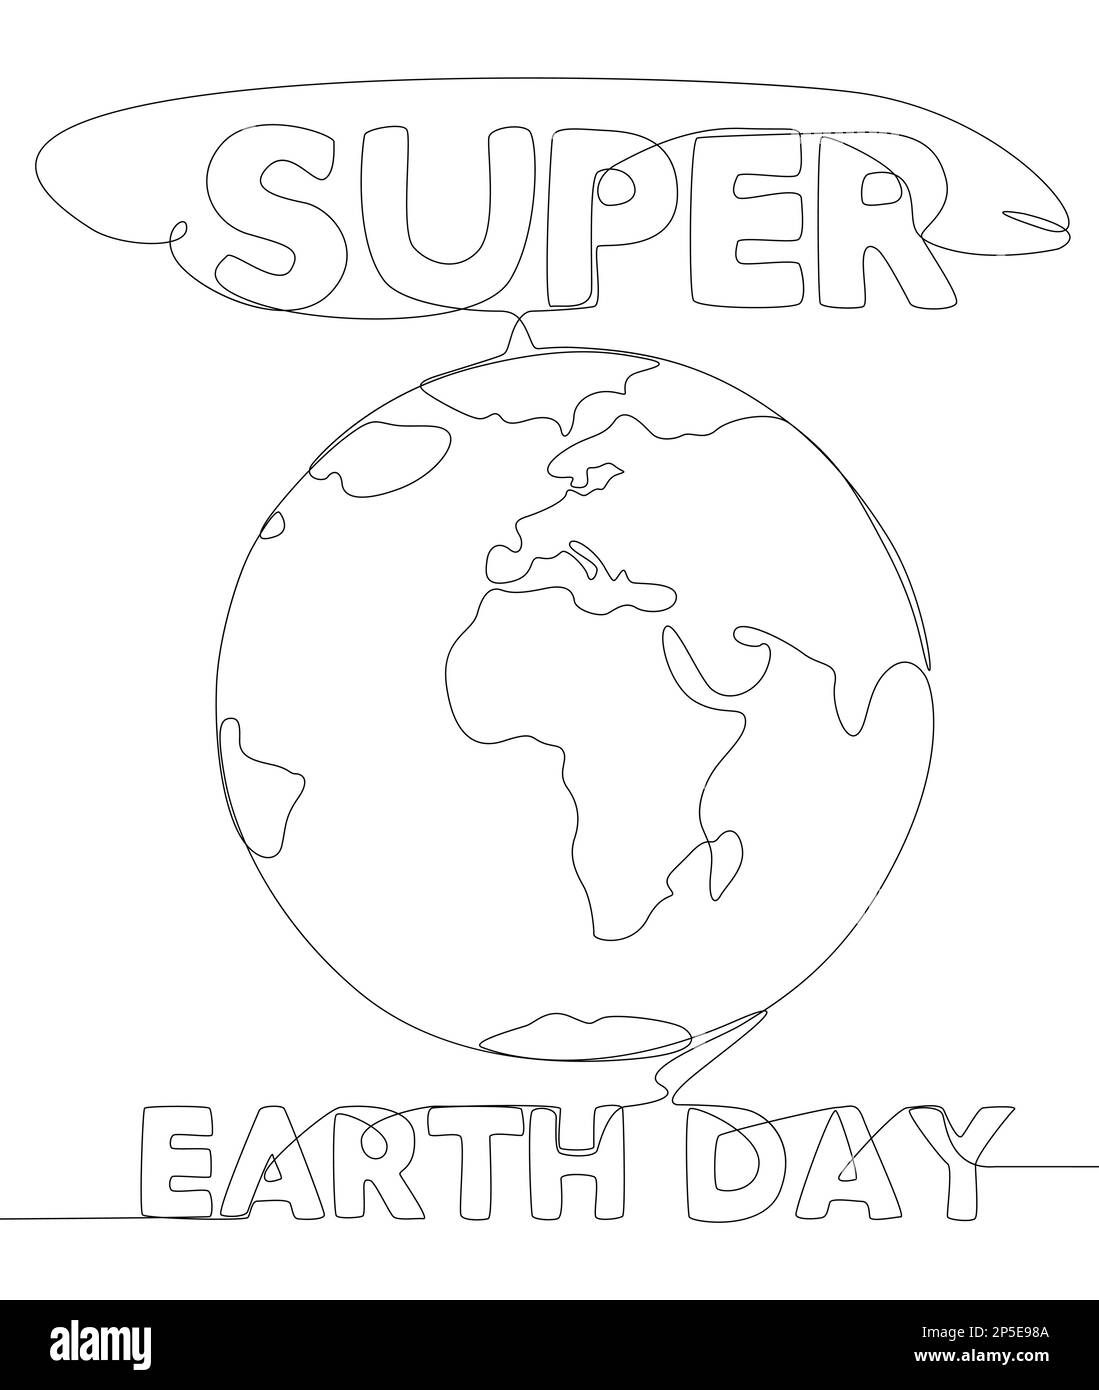 One continuous line of Super Earth Day word. Thin Line Illustration vector concept. Contour Drawing Creative ideas. Stock Vector